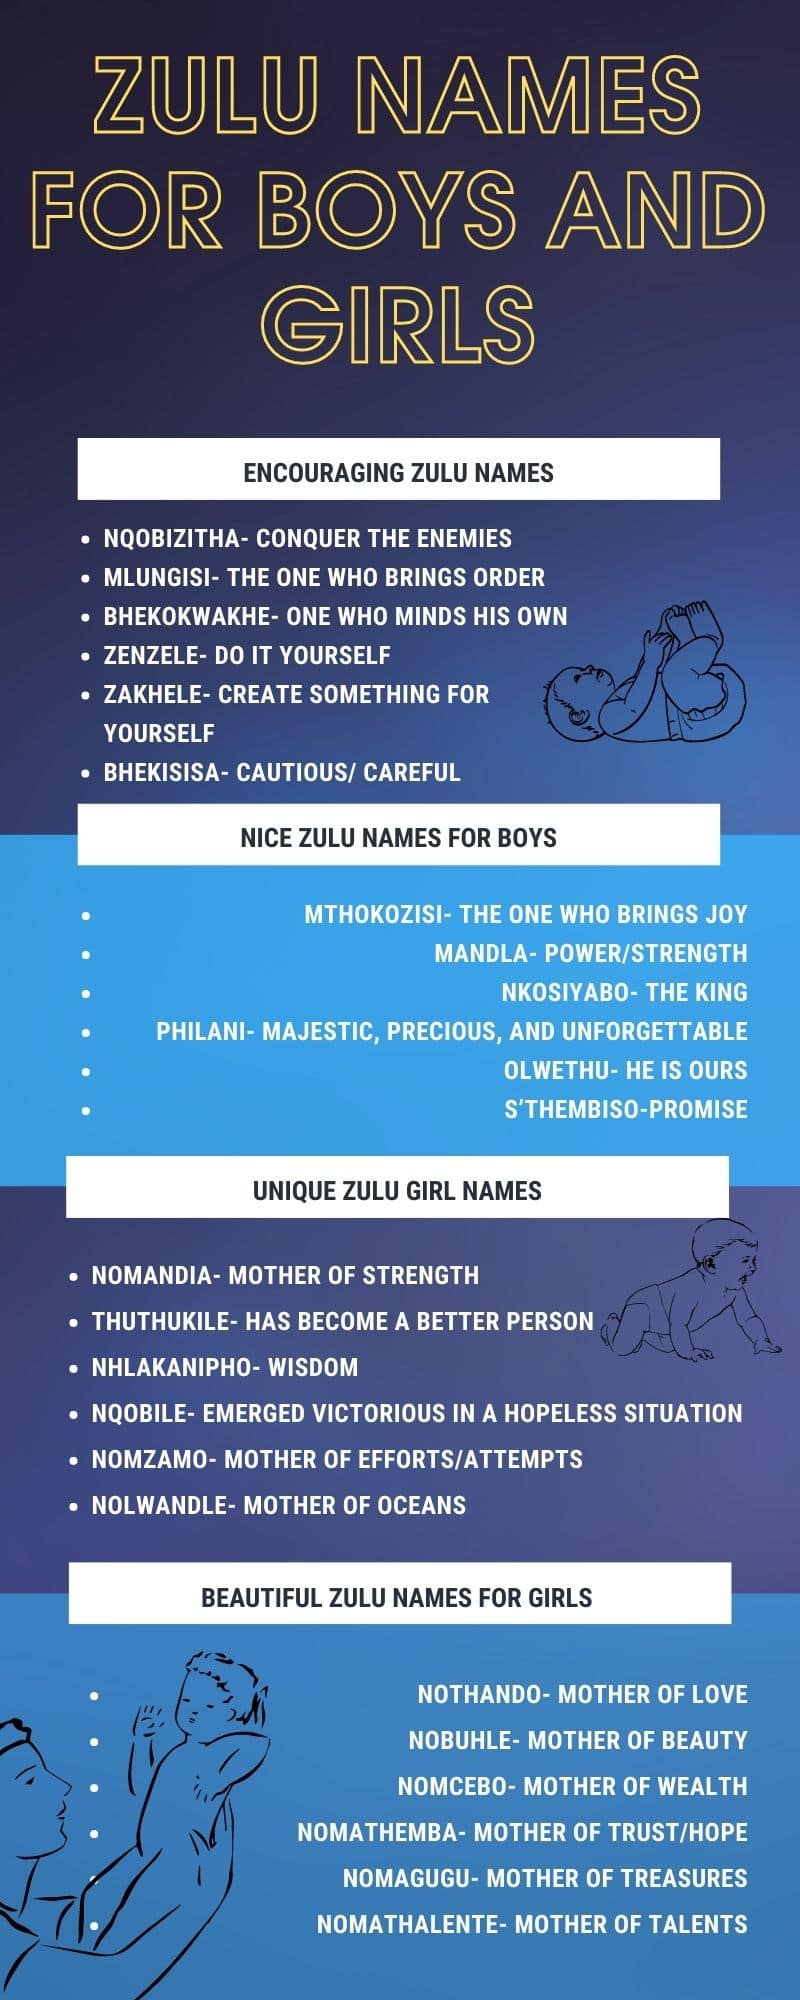 Zulu names for boys and girls